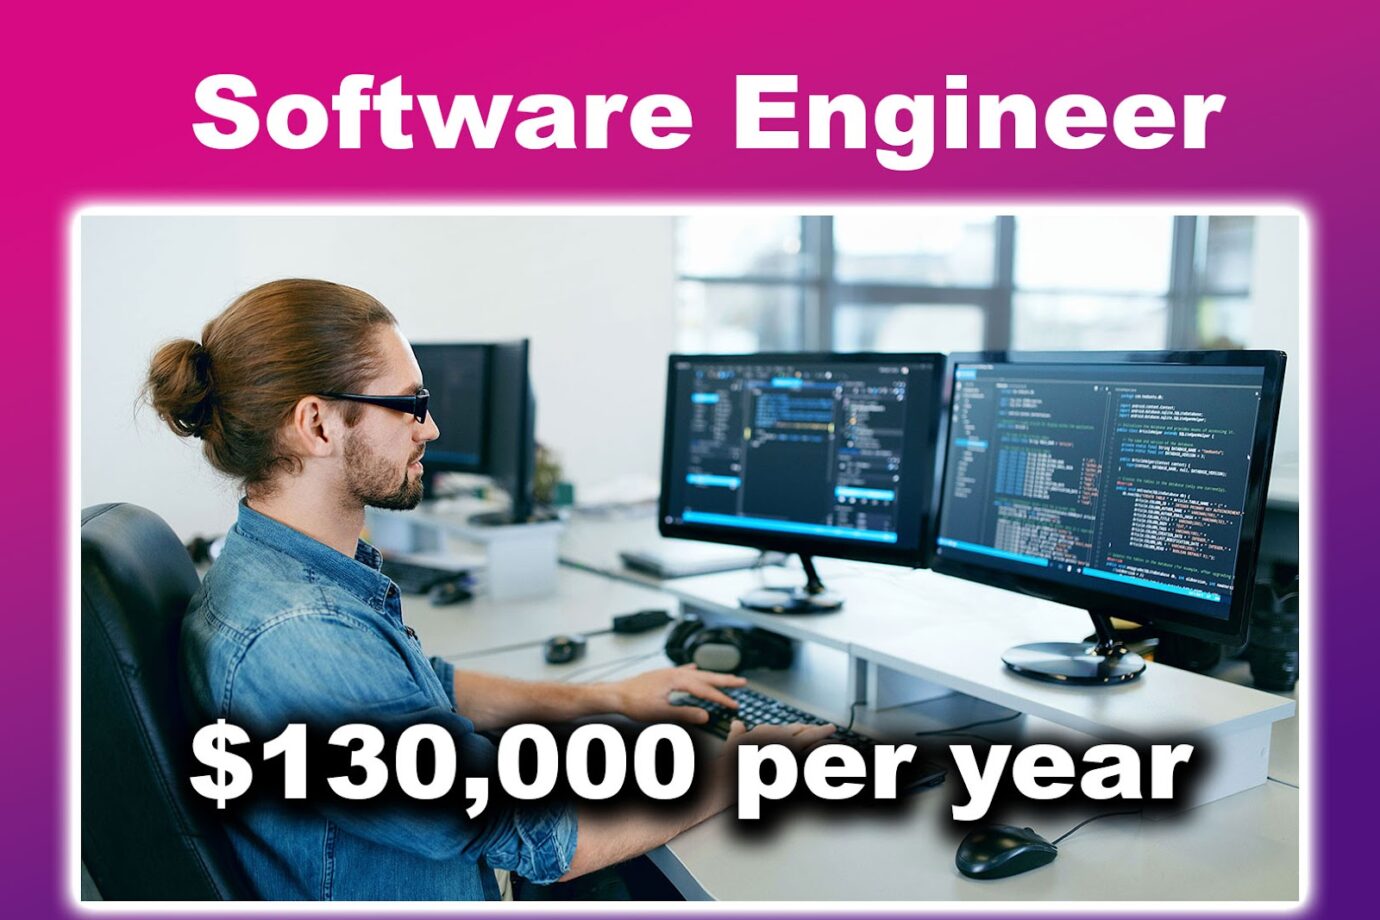 Well paying Job - Software Engineer